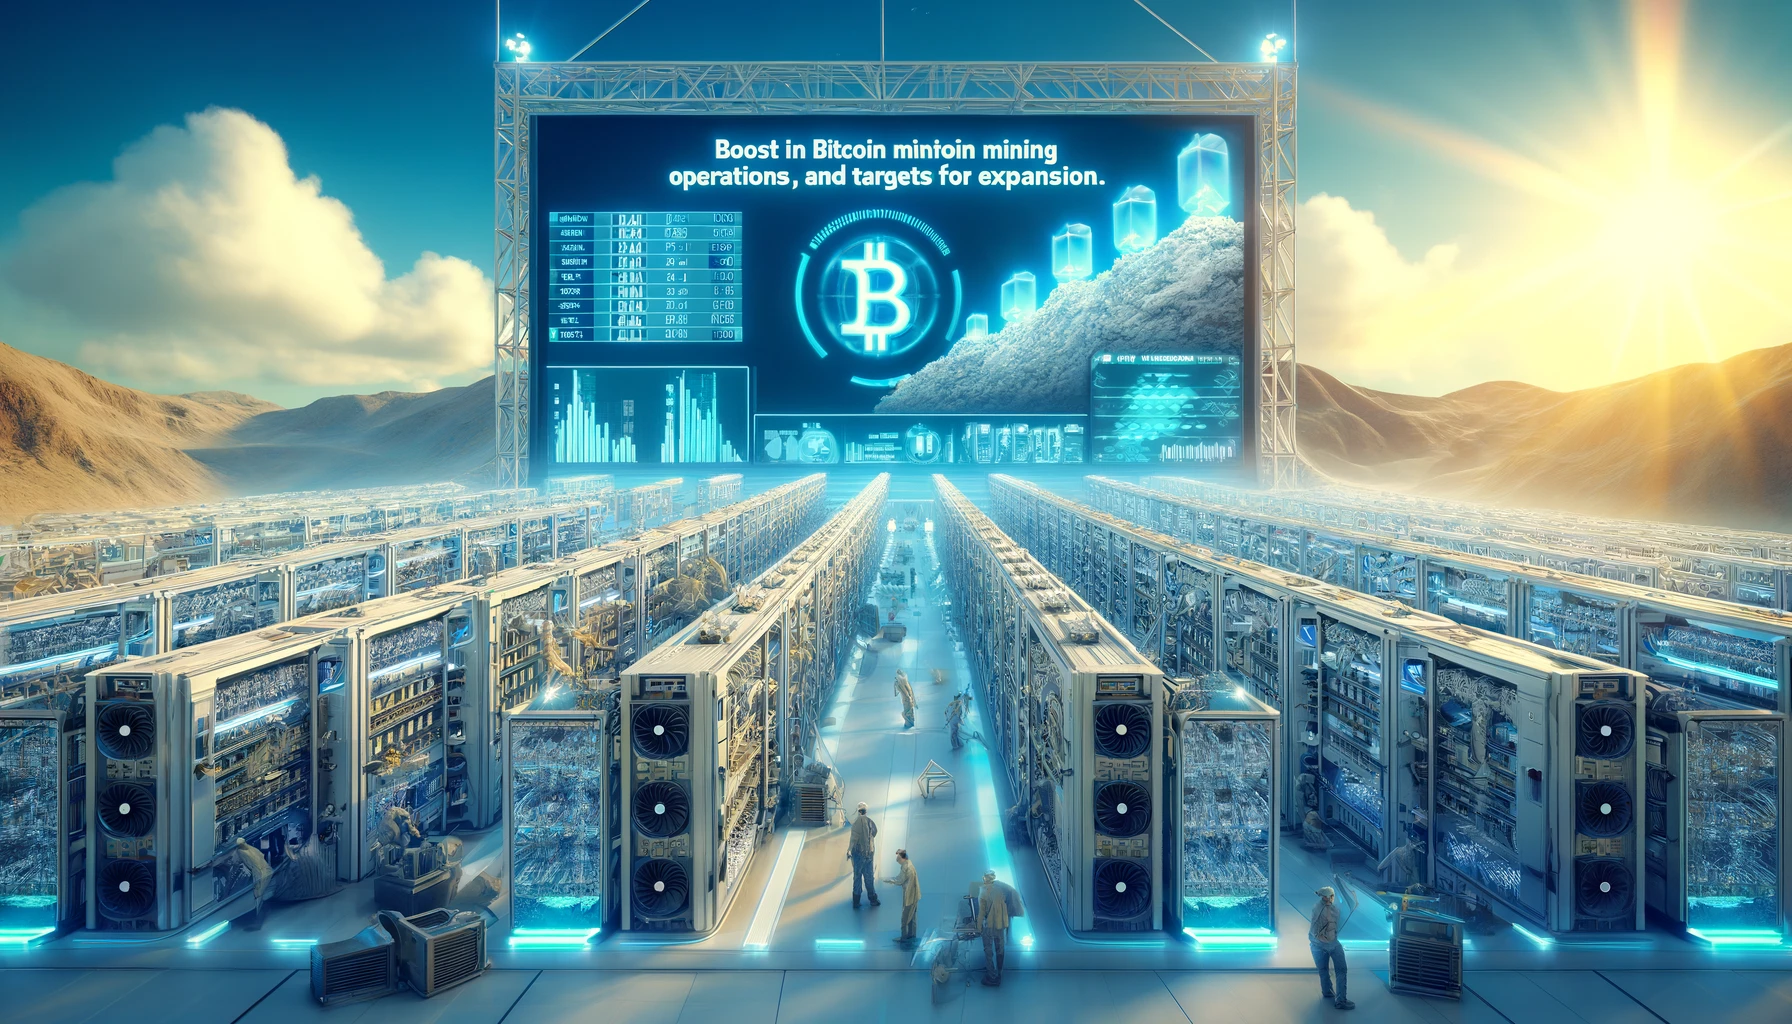 TeraWulf Boosts Bitcoin Mining Operations and Targets Expansion